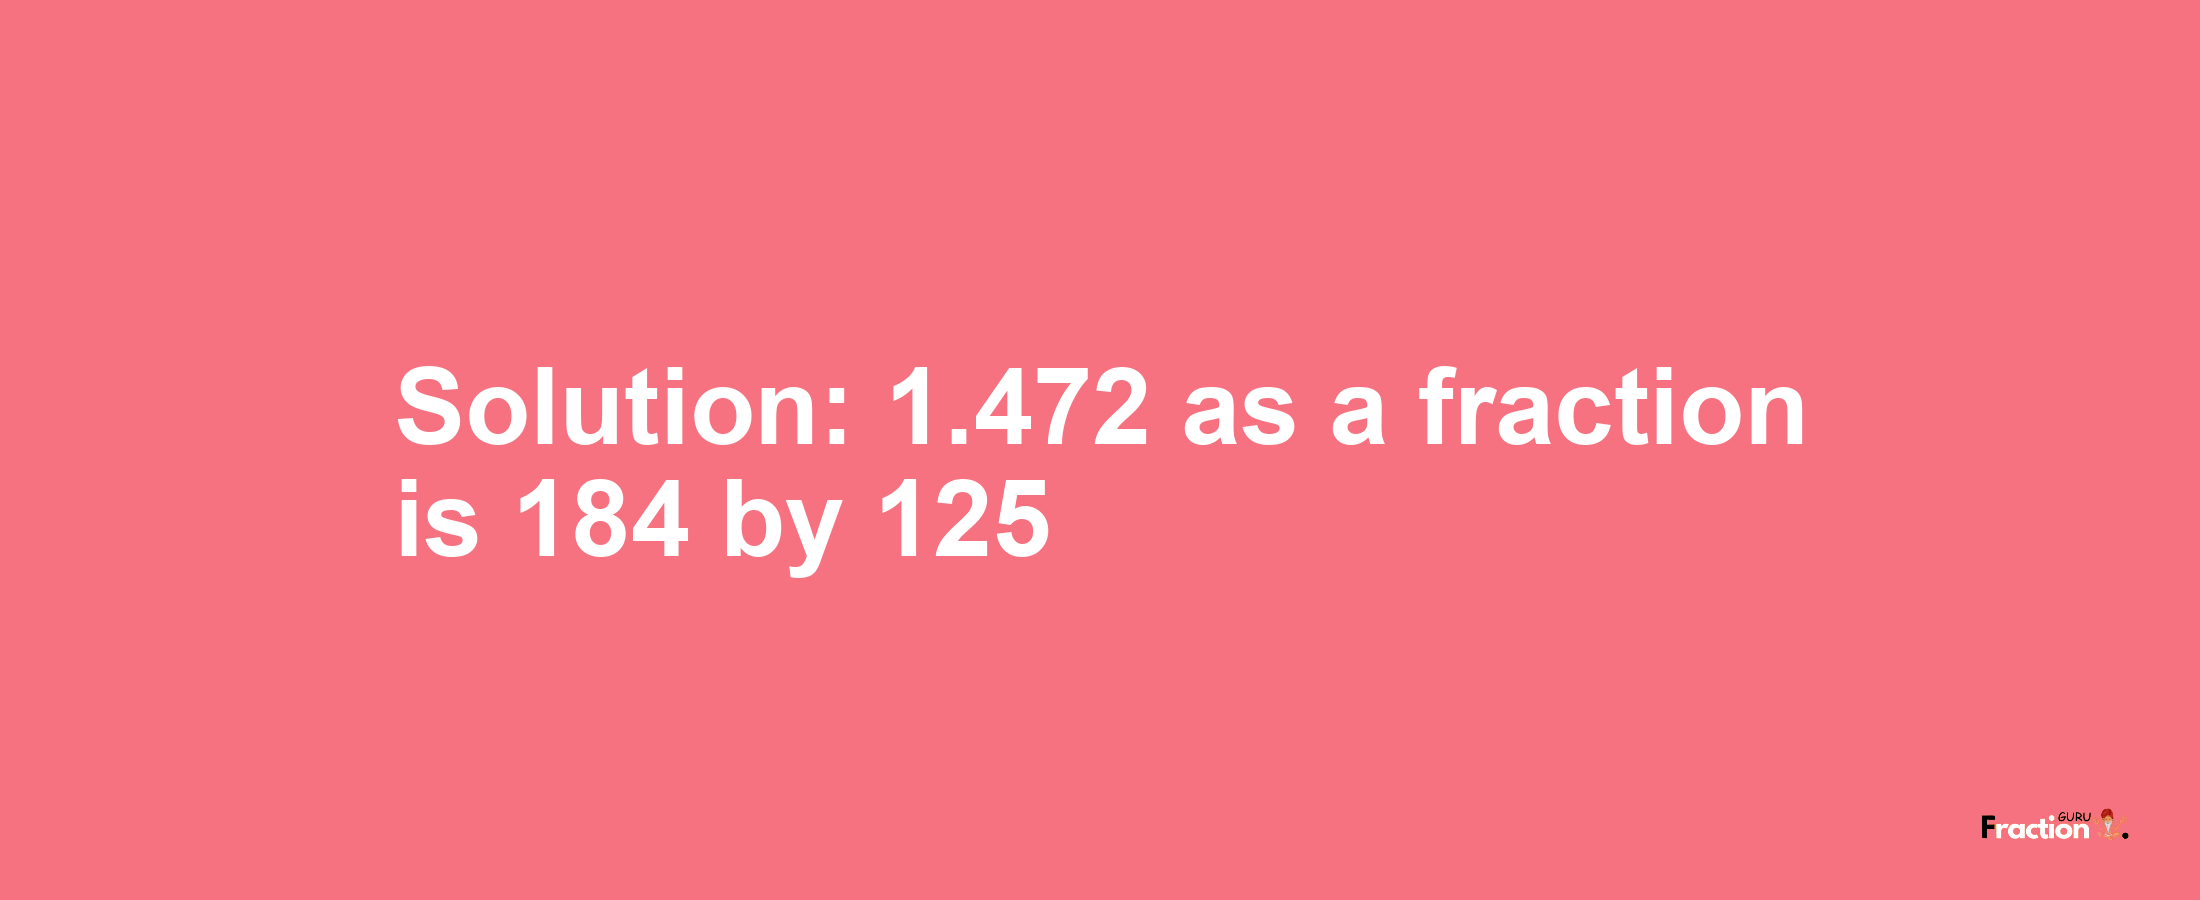 Solution:1.472 as a fraction is 184/125